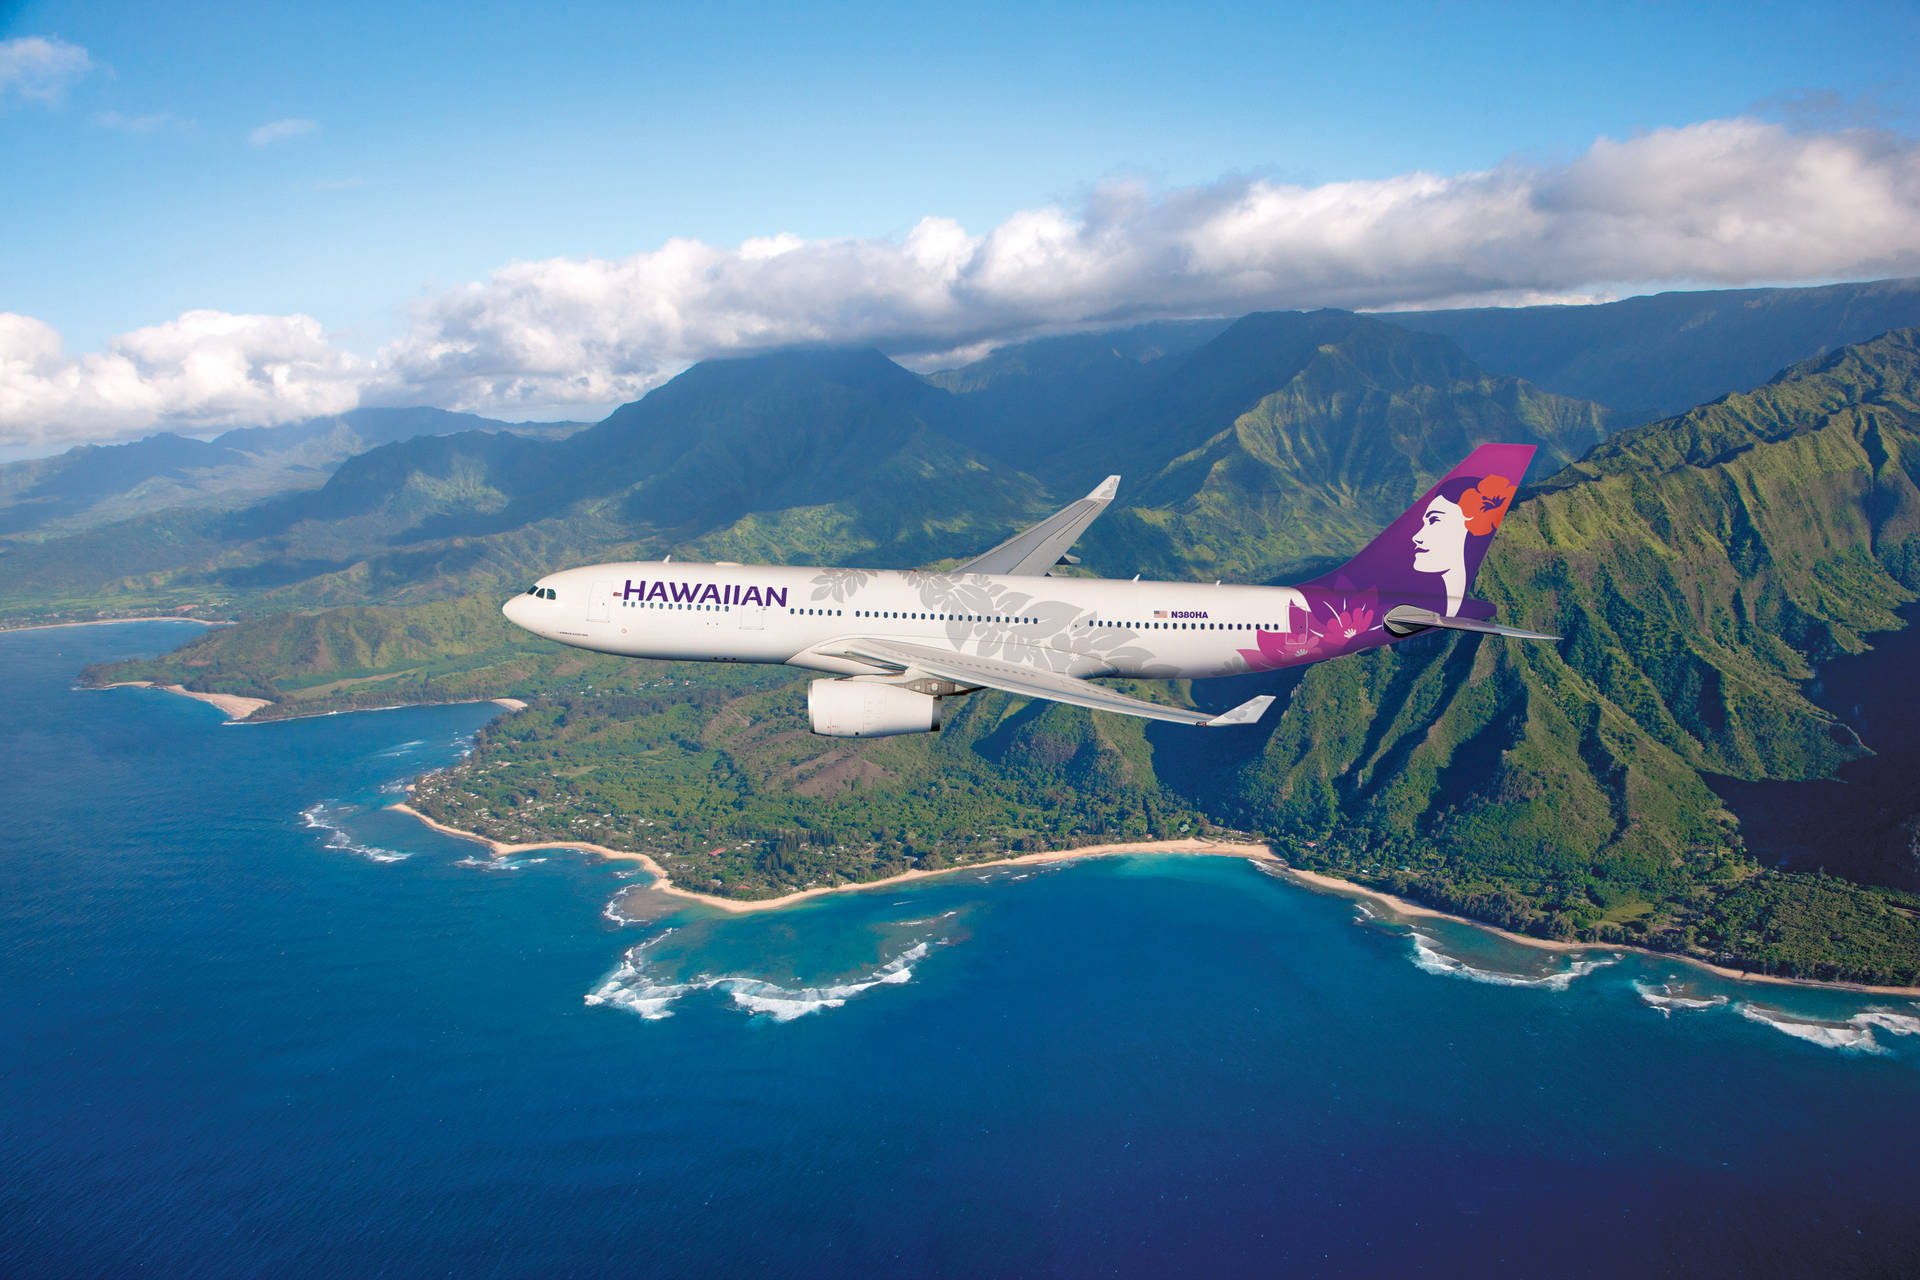 Hawaiian Airlines Plane Over Lush Green Mountains Wallpaper